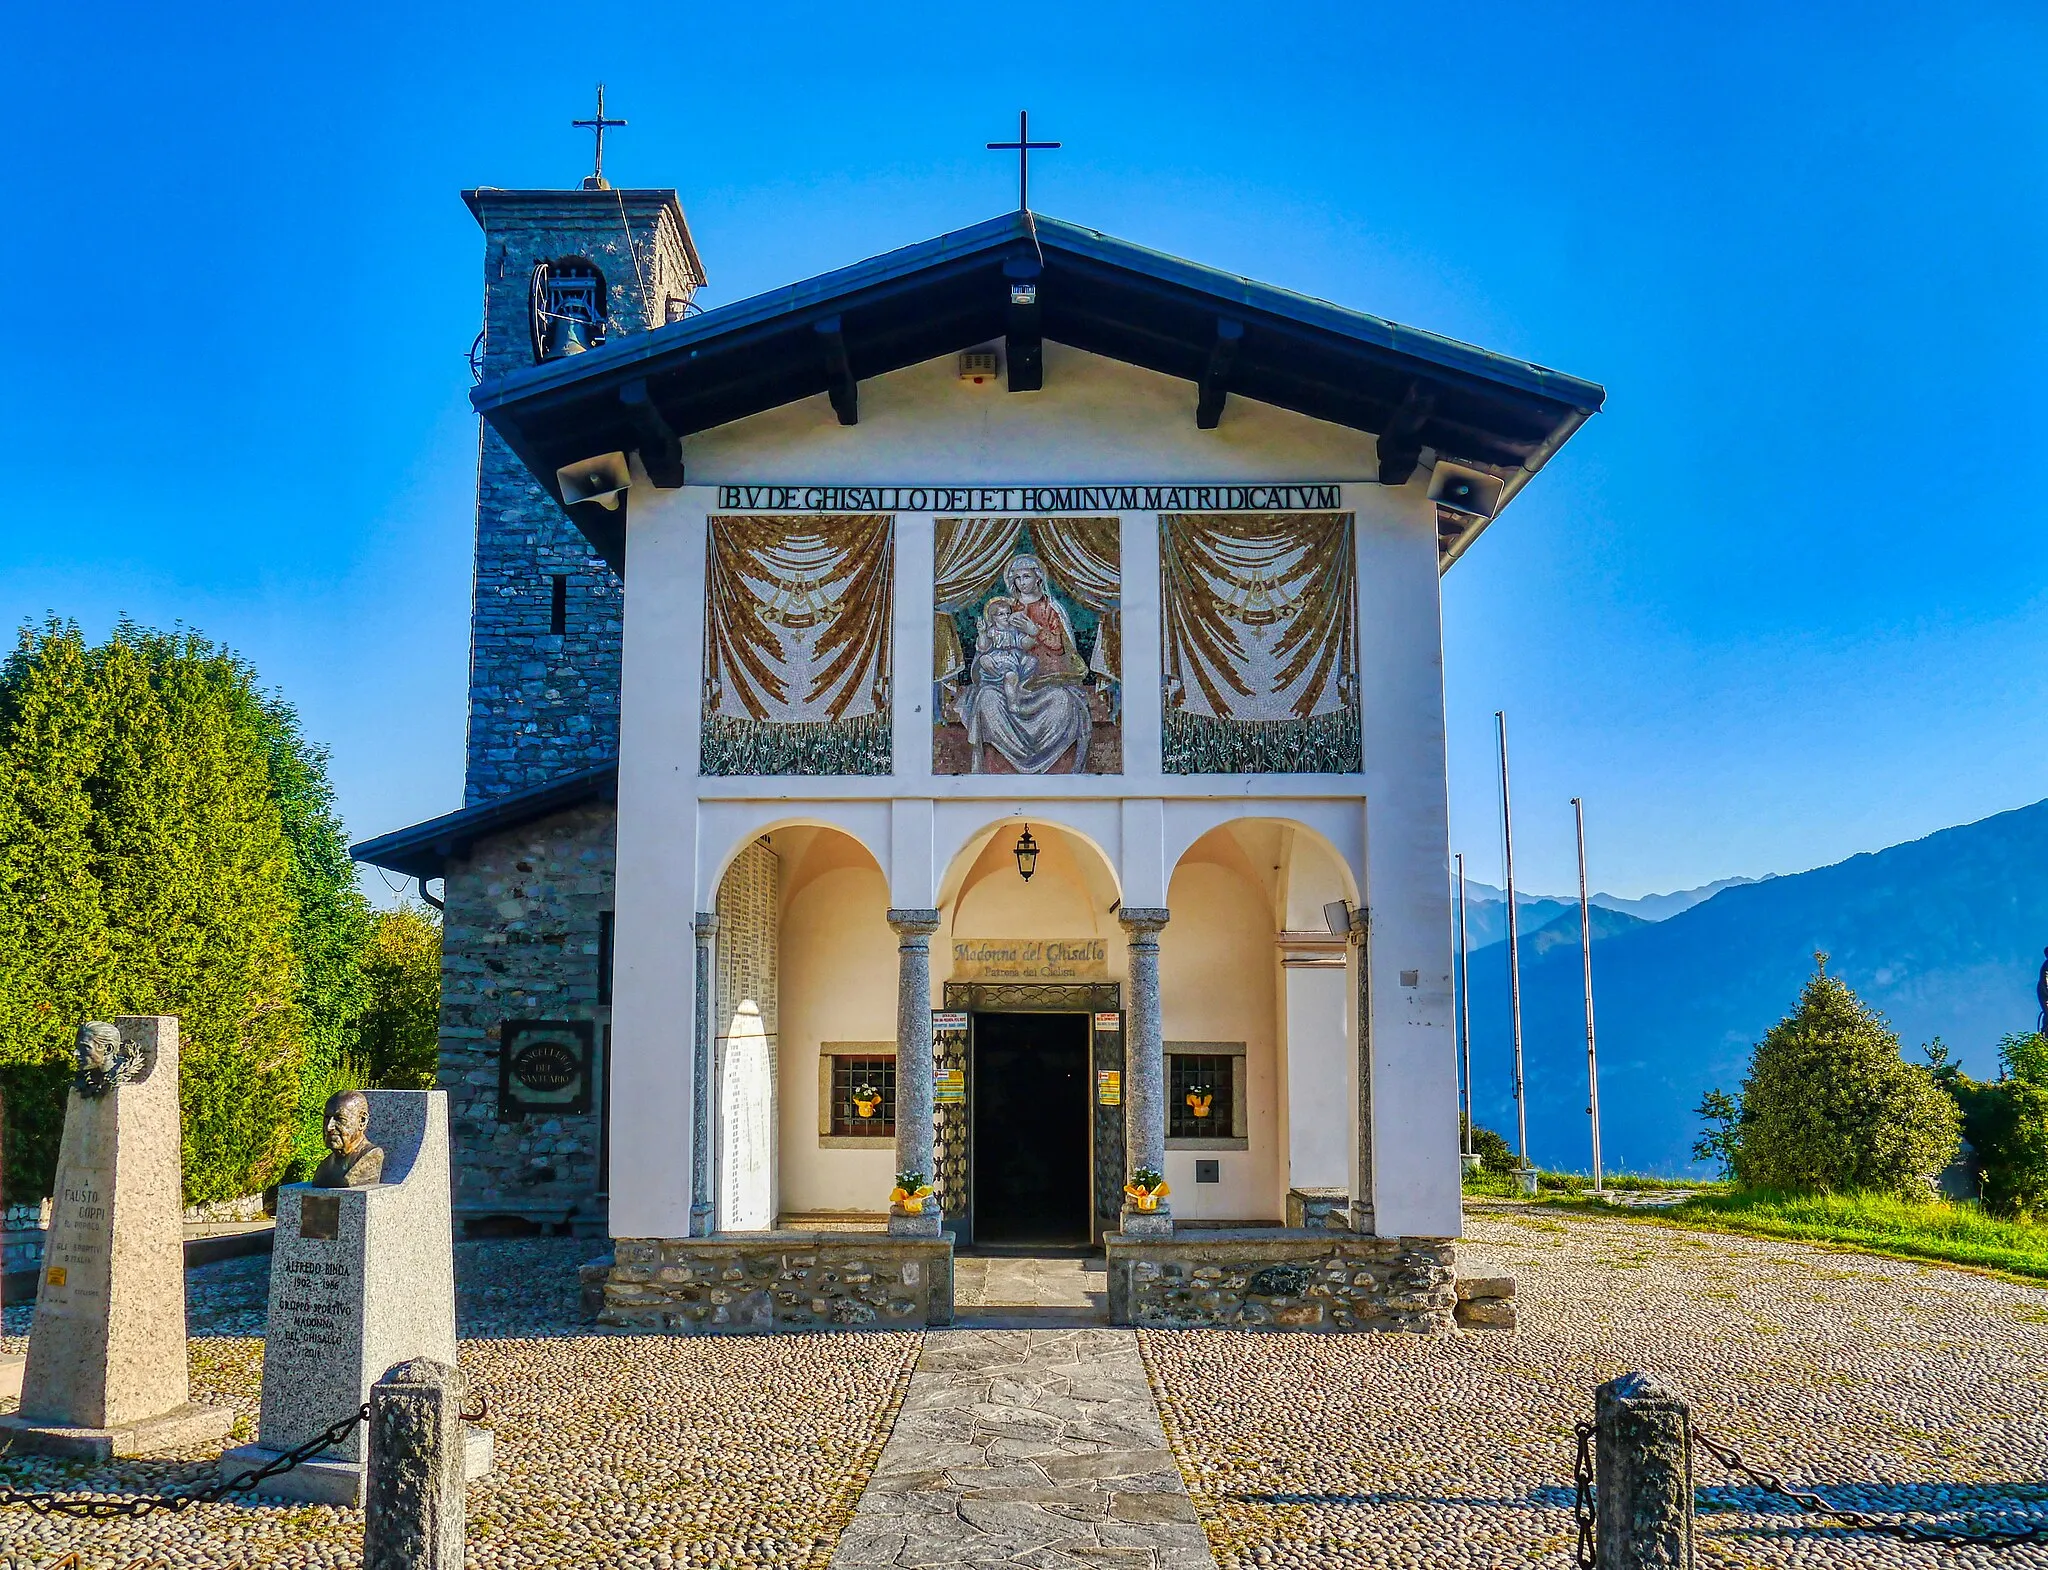 Photo showing: Facade of the Sanctuary of Our Lady of Ghisallo, Magreglio, Province of Como, Region of Lombardy, Italy